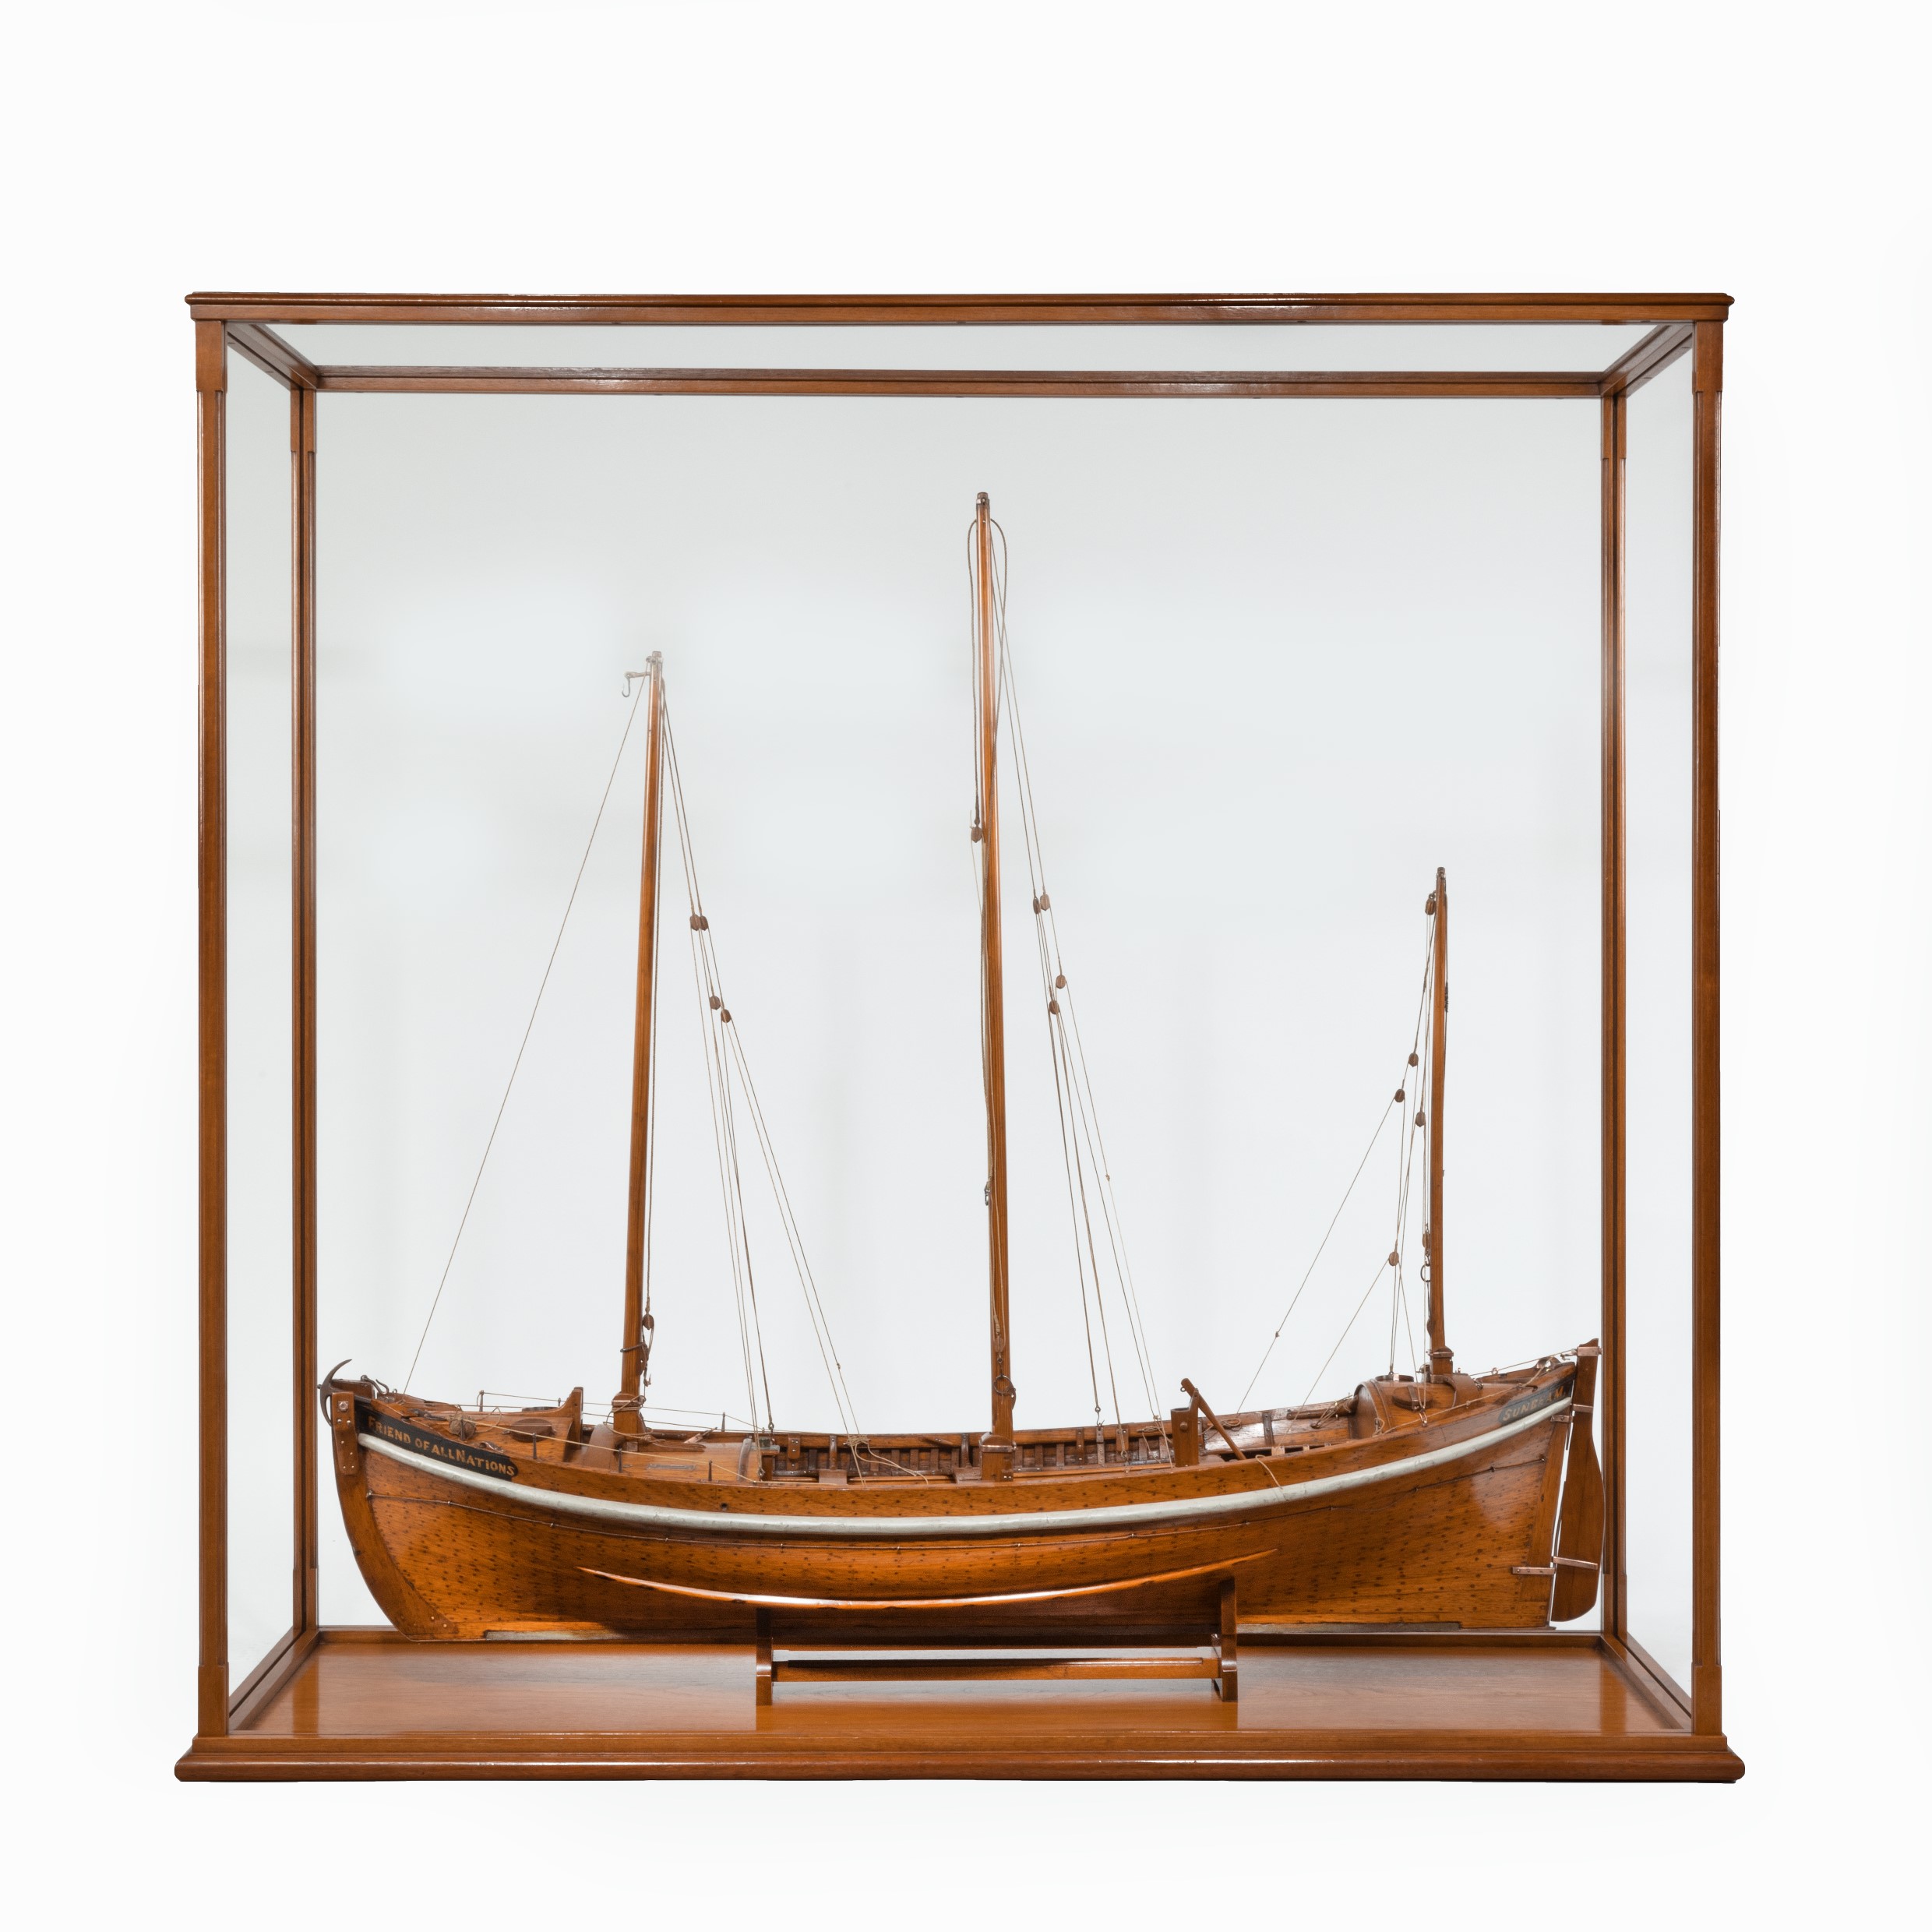 A Lugger lifeboat model by Twyman for the International Exhibition, London 1862.